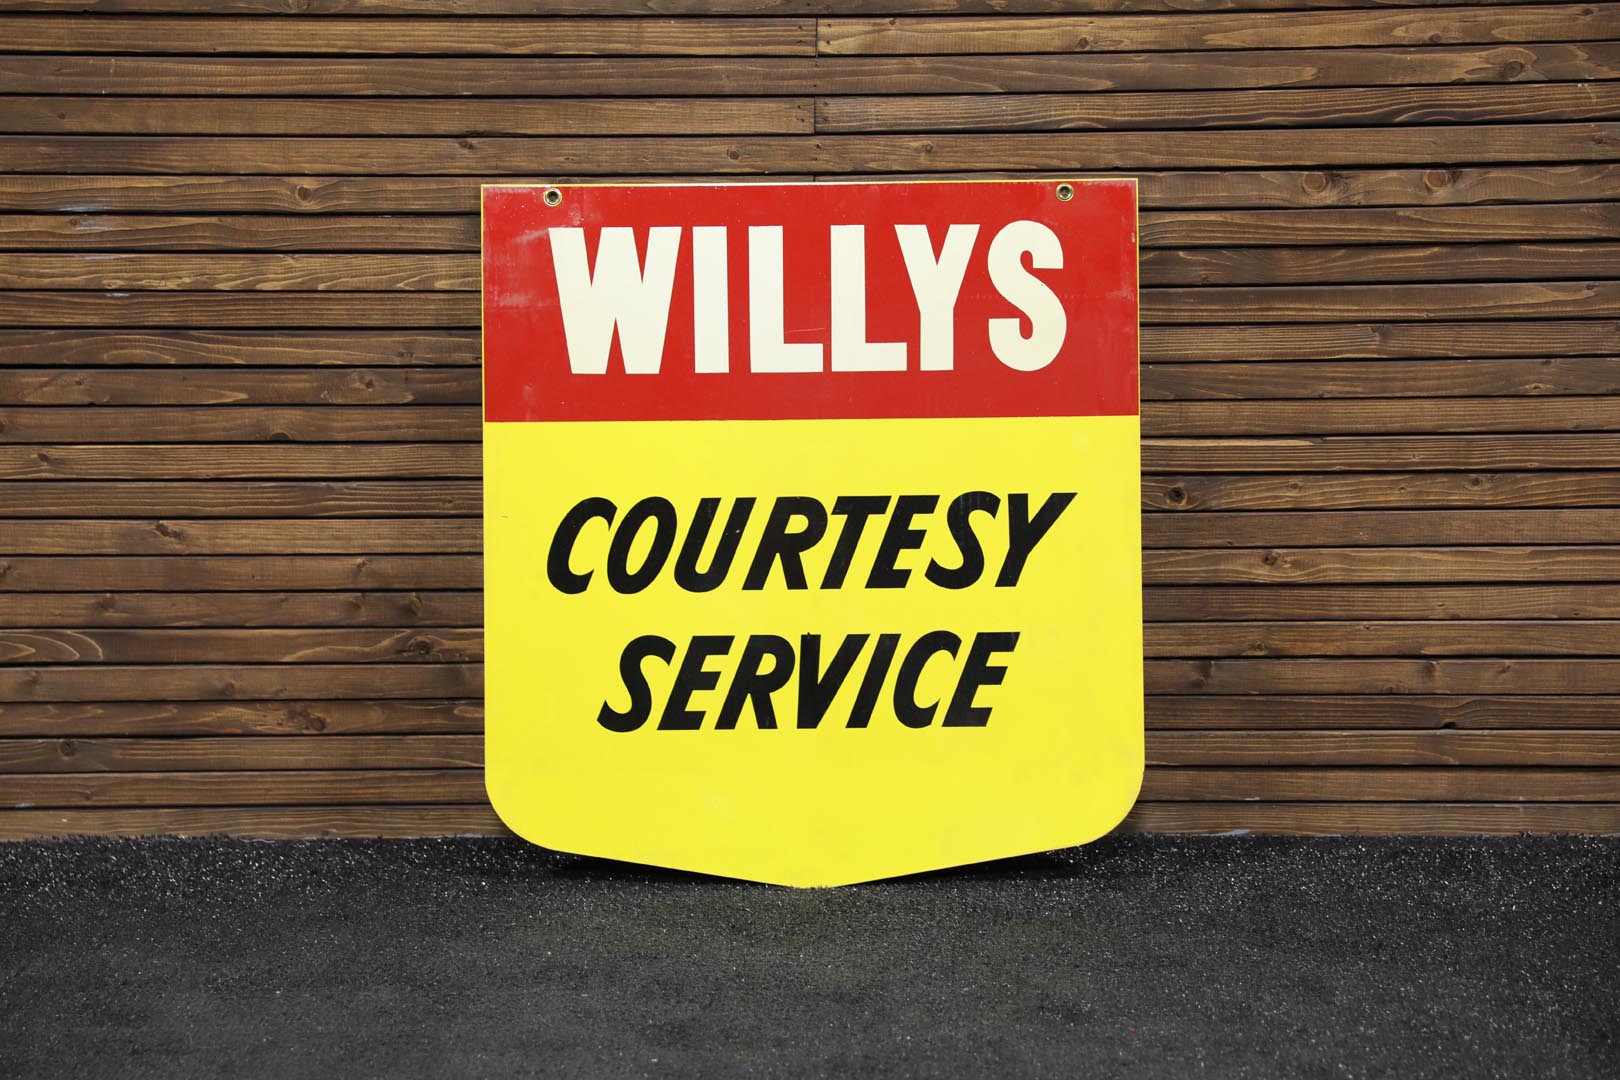  NOS 1955 Willys Courtesy Servi ce Double-Sided Tin Sign 